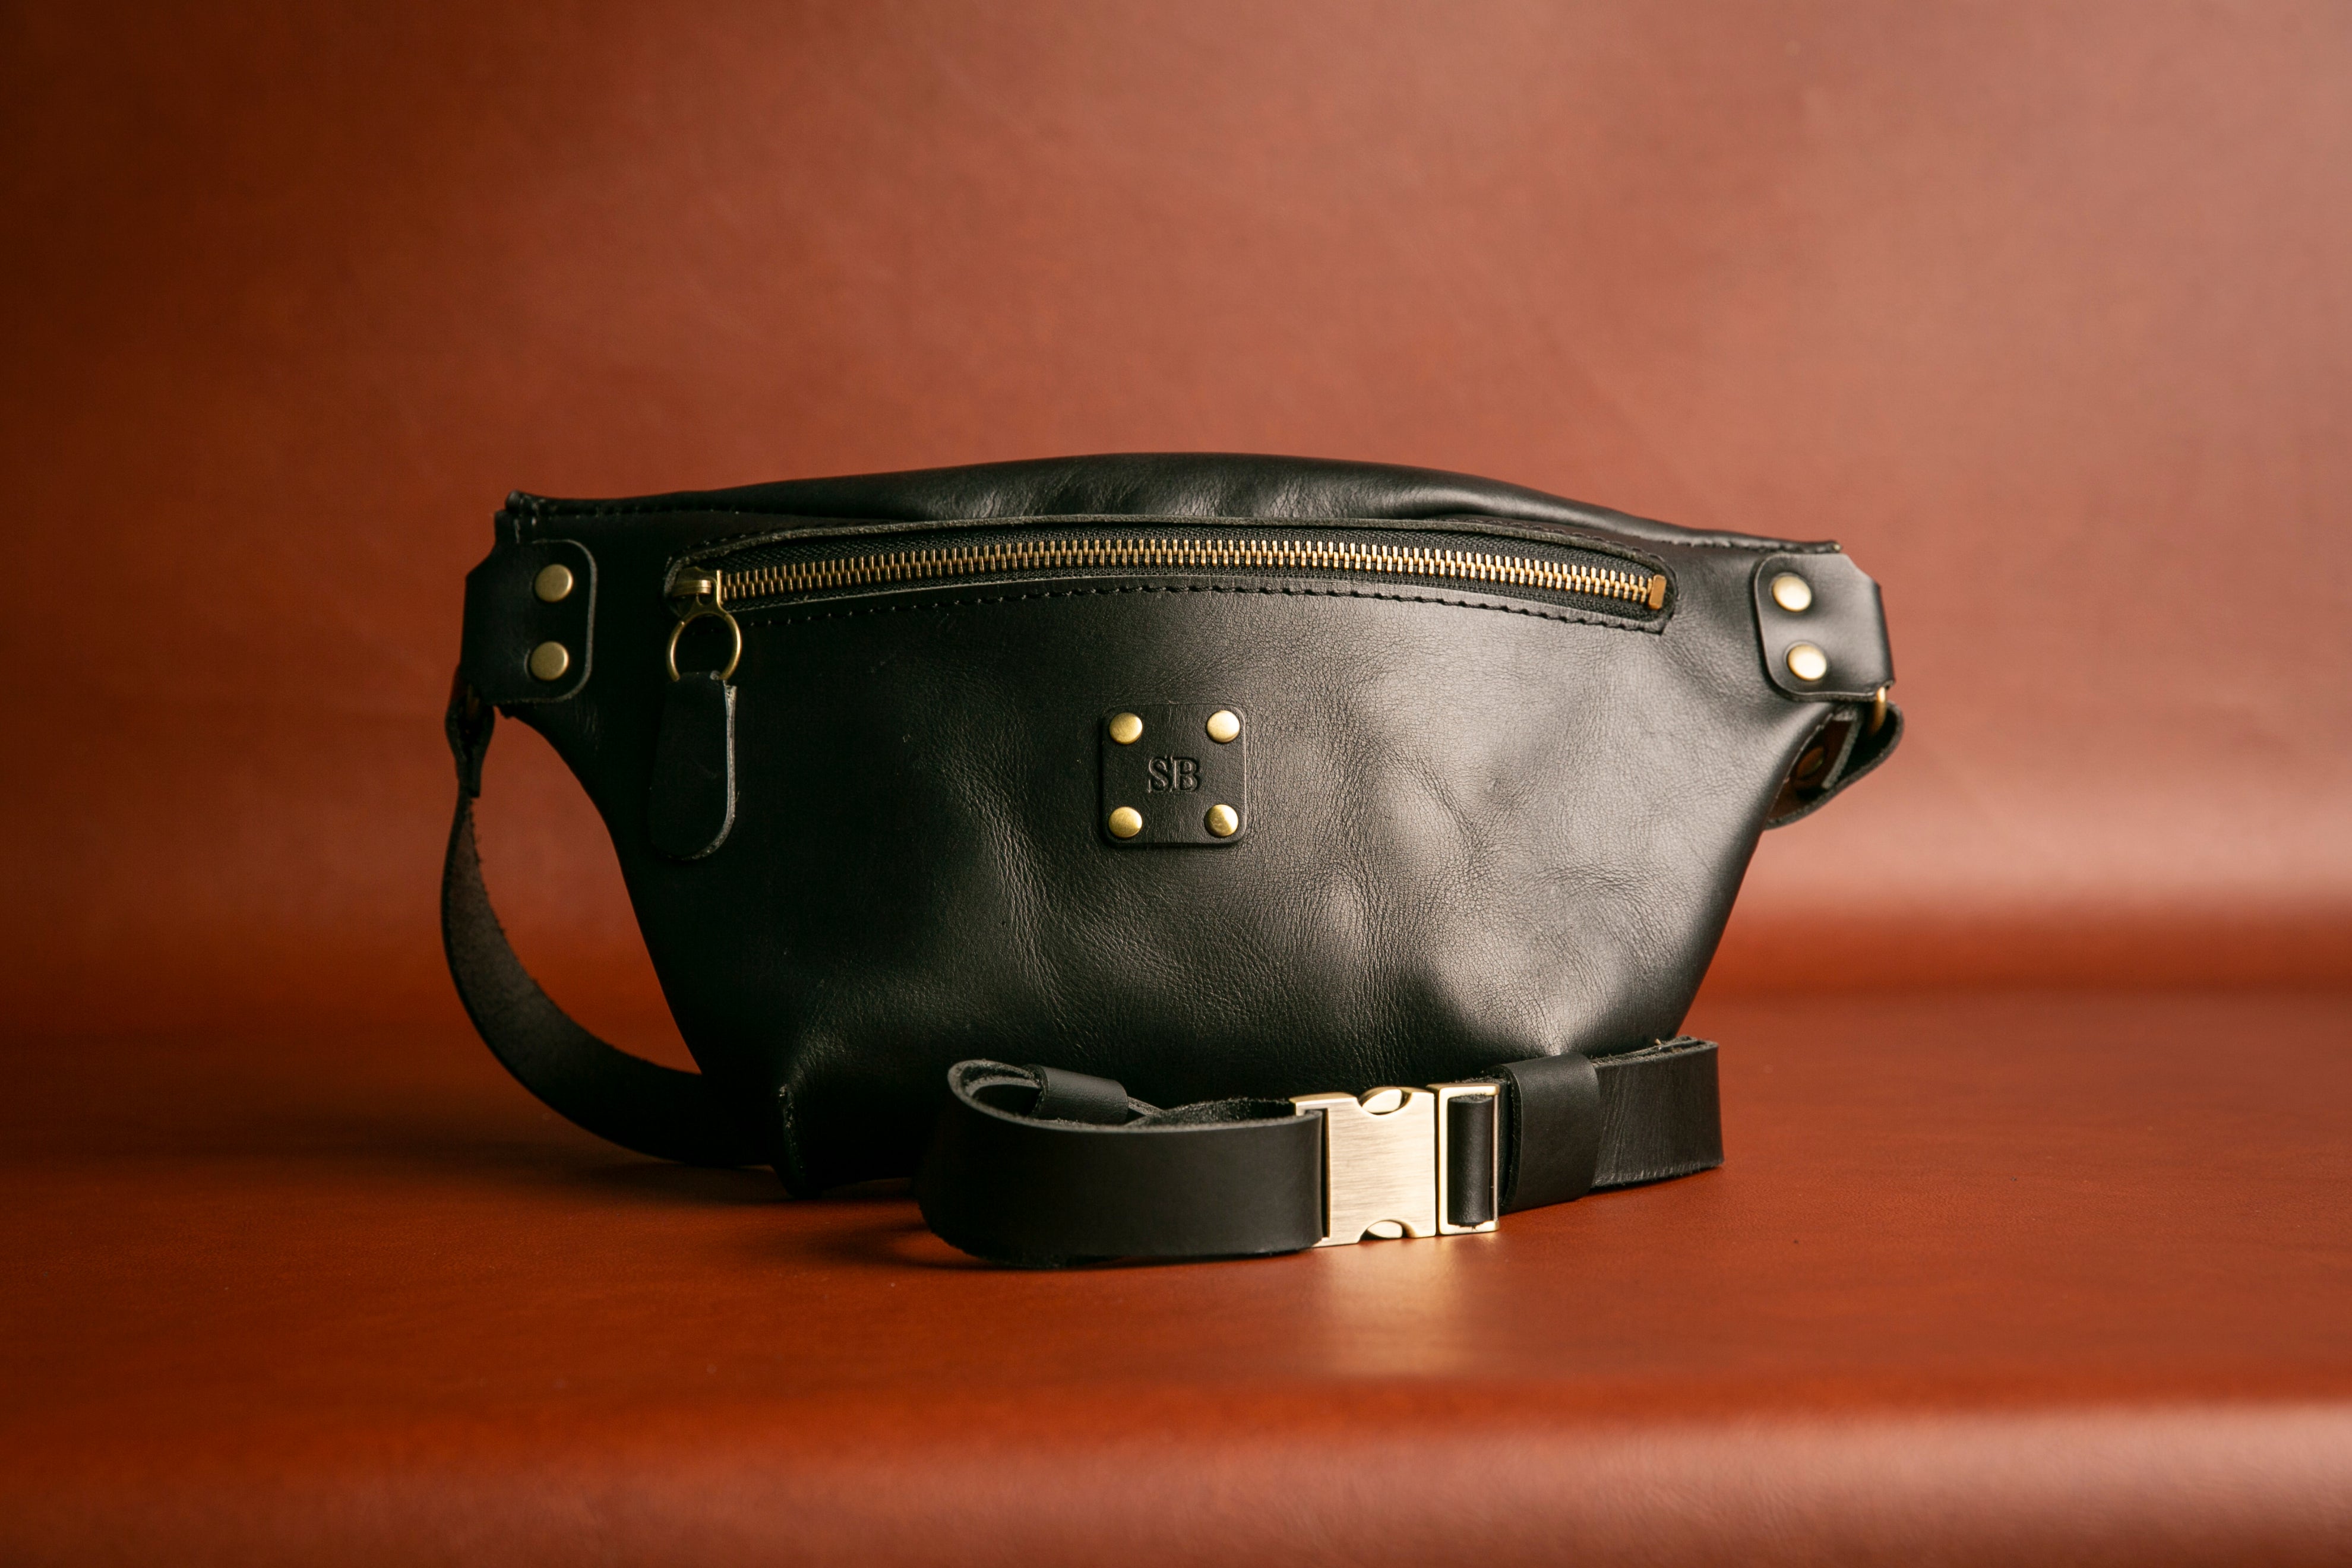 No.105 Leather Fanny Pack, Bum Bag with adjustable strap.